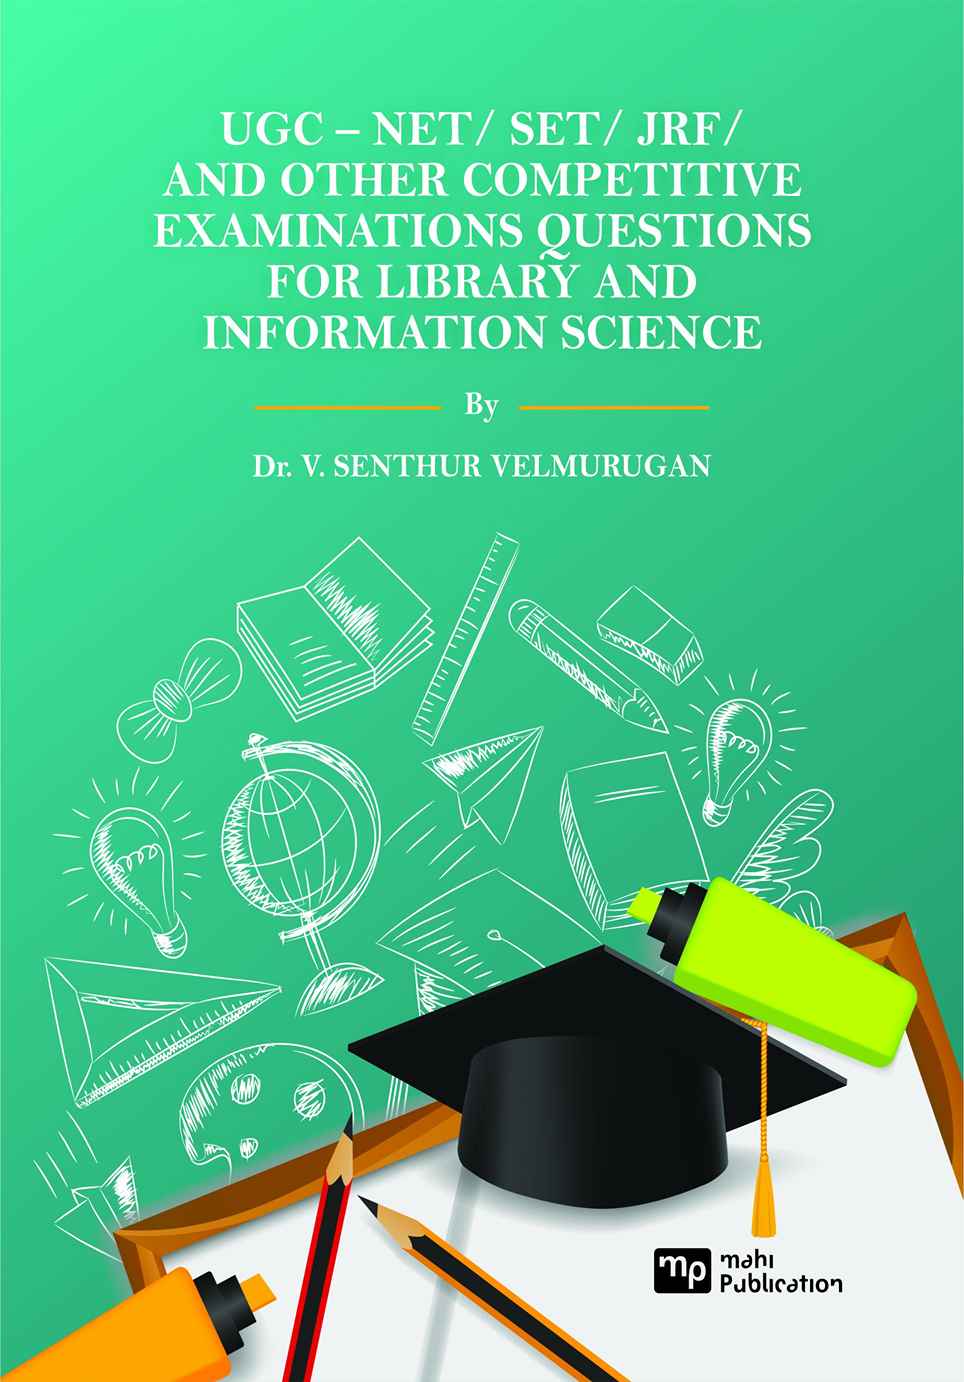 Ugc – Net/ Set/ Jrf/ And Other Competitive EXAminations Questions For Library And Information Science